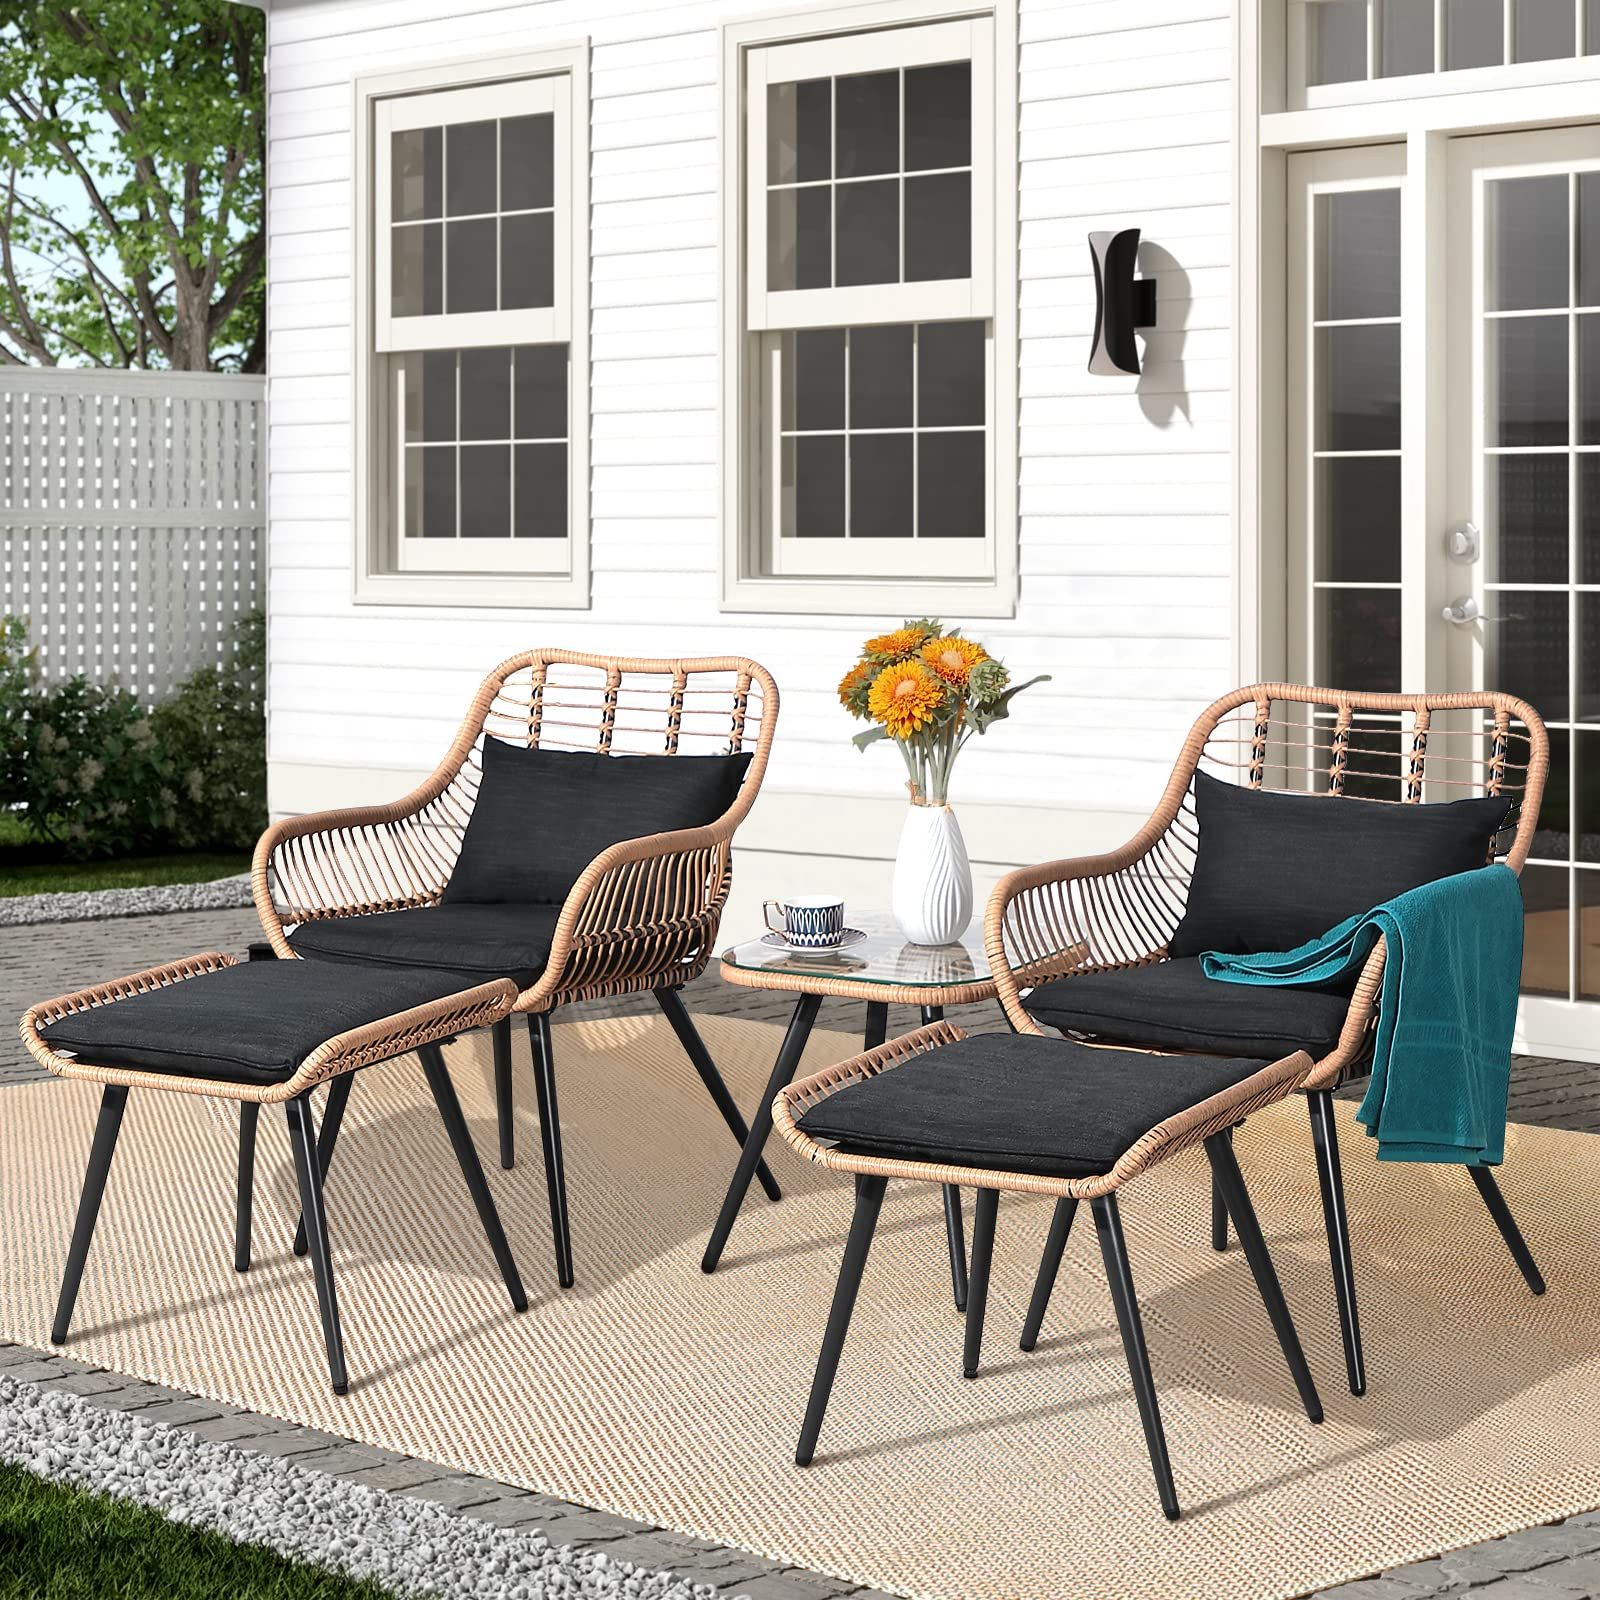 5 Piece Patio Furniture Set Intended For Fashionable Amazon: Joivi 5 Piece Outdoor Patio Furniture Set, Pe Rattan Wicker  Small Patio Conversation Set Porch Furniture, Cushioned Patio Chairs With  Ottomans And Side Table : Patio, Lawn & Garden (View 8 of 15)